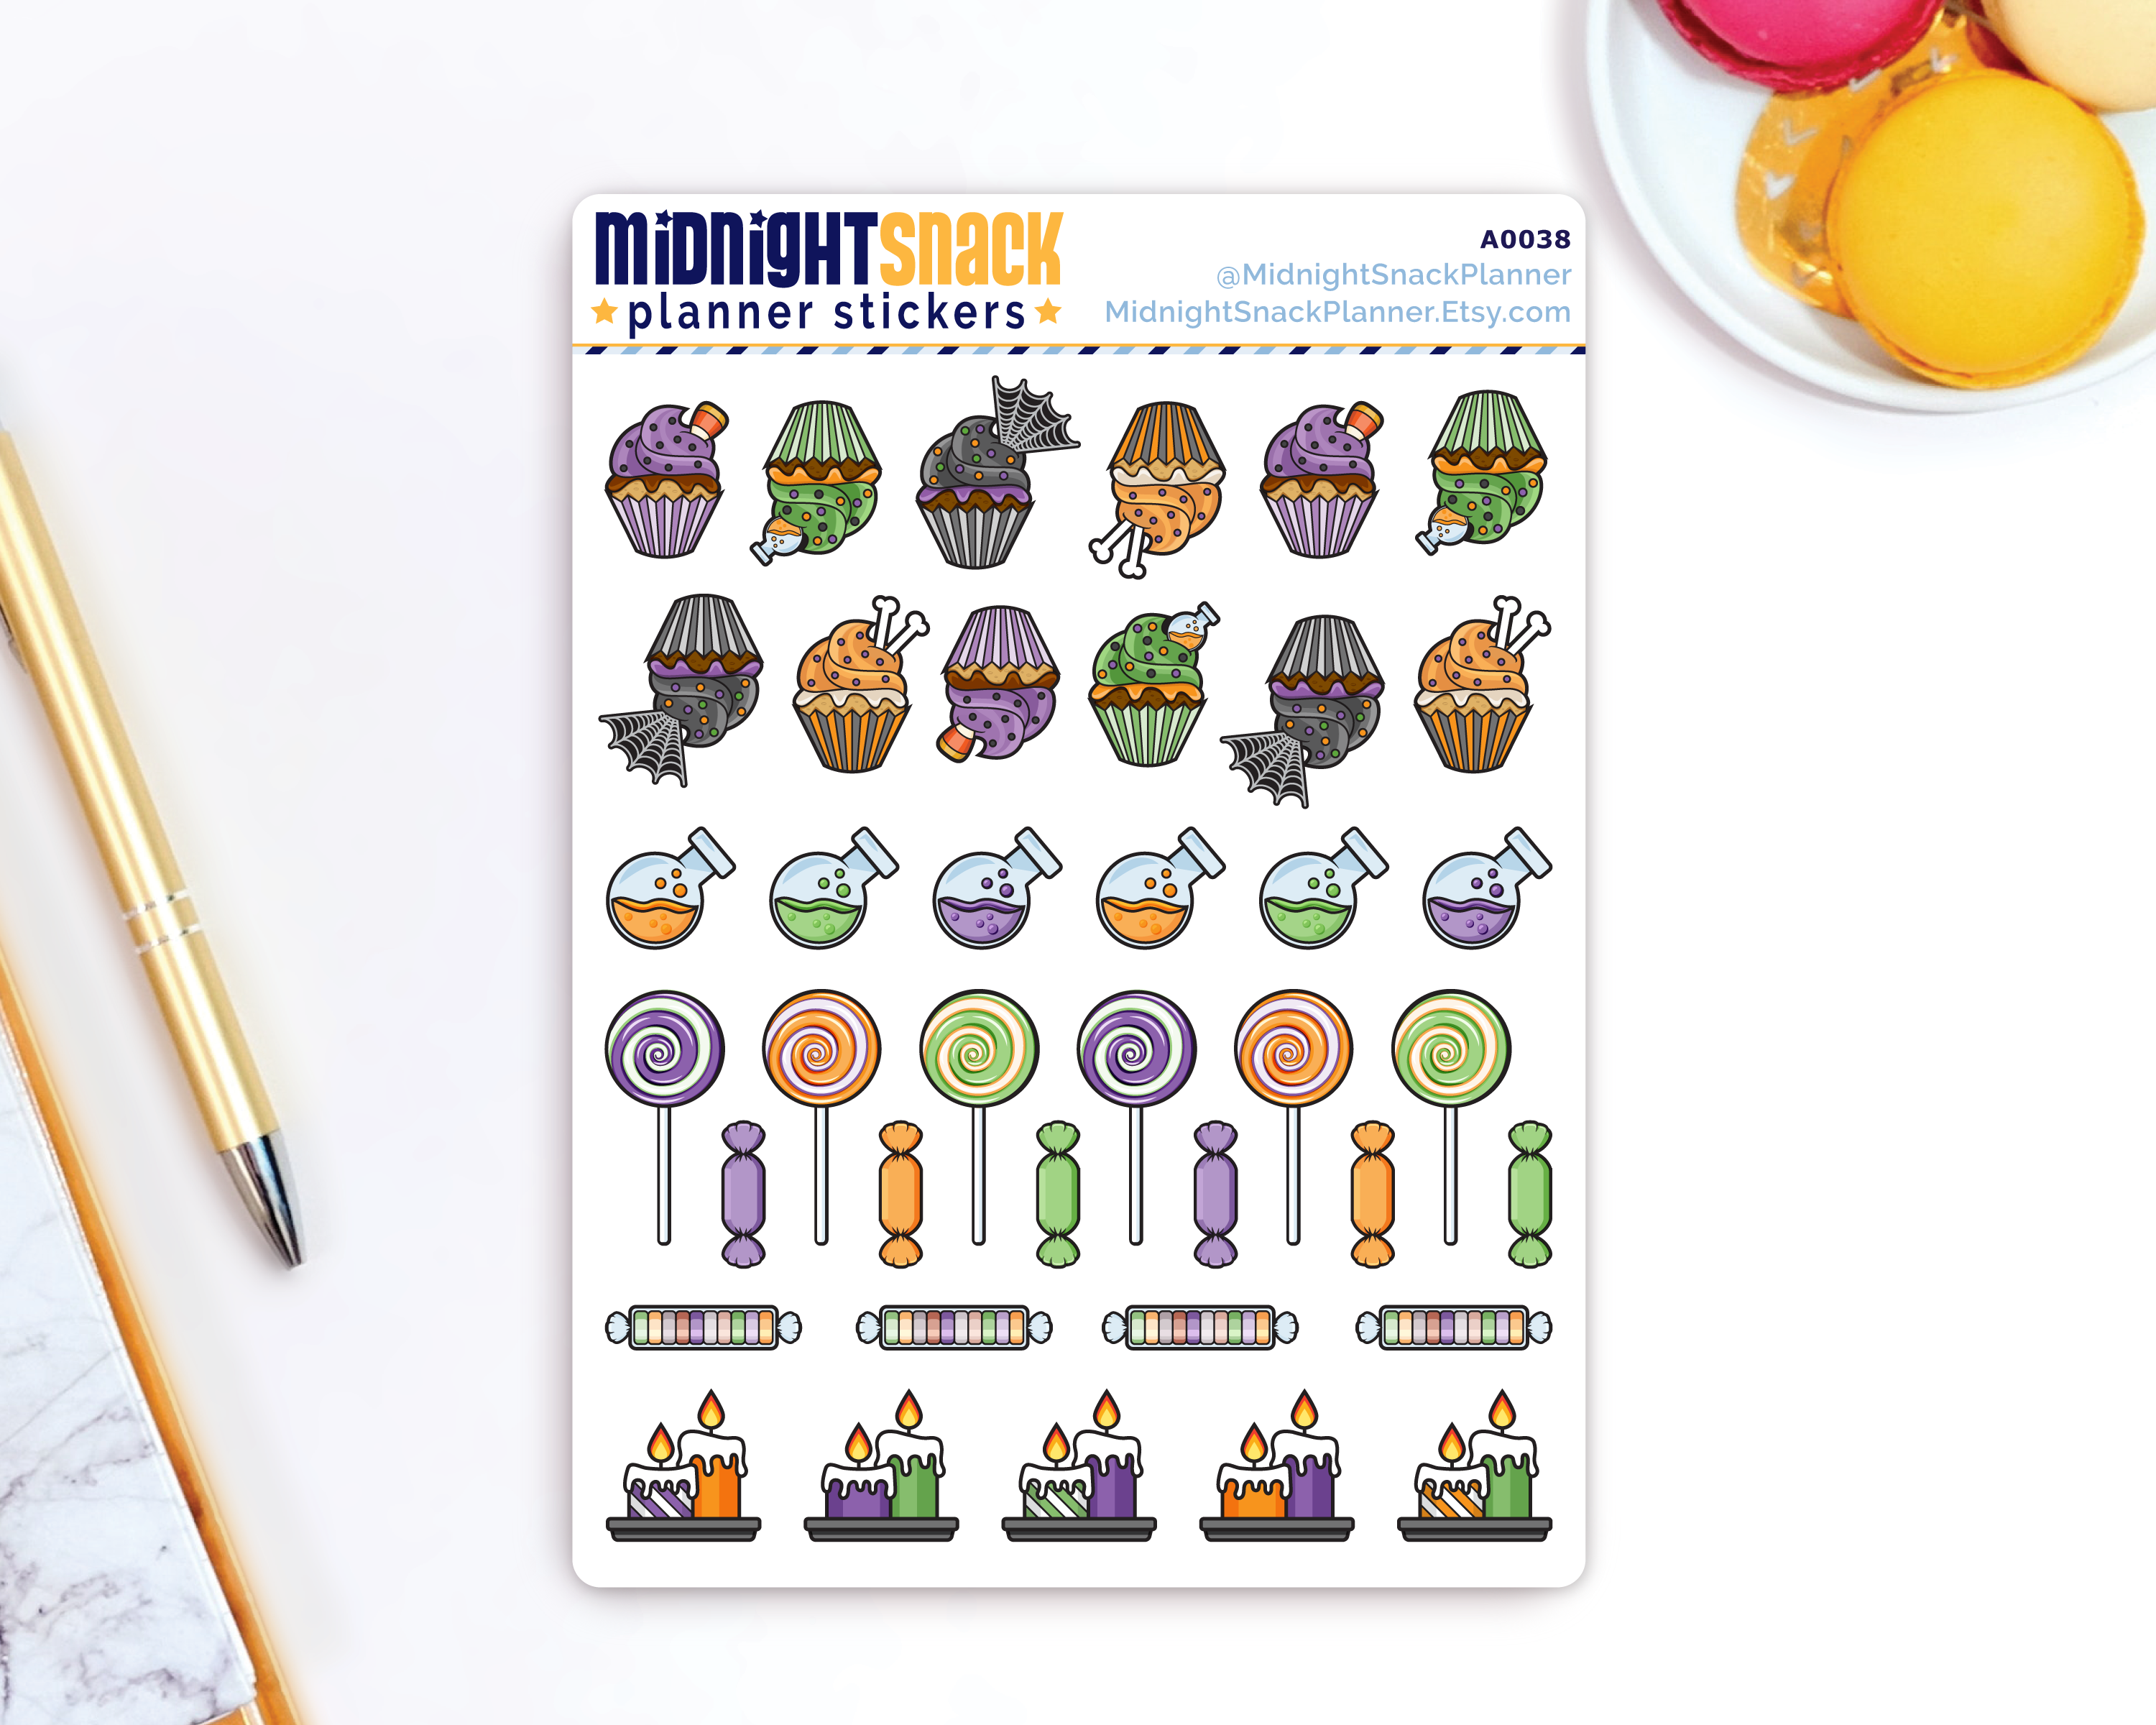 Halloween Sampler: Spooky Planner Stickers from Midnight Snack Planner. Featuring a close up of Halloween cupcakes, candy and candles. 